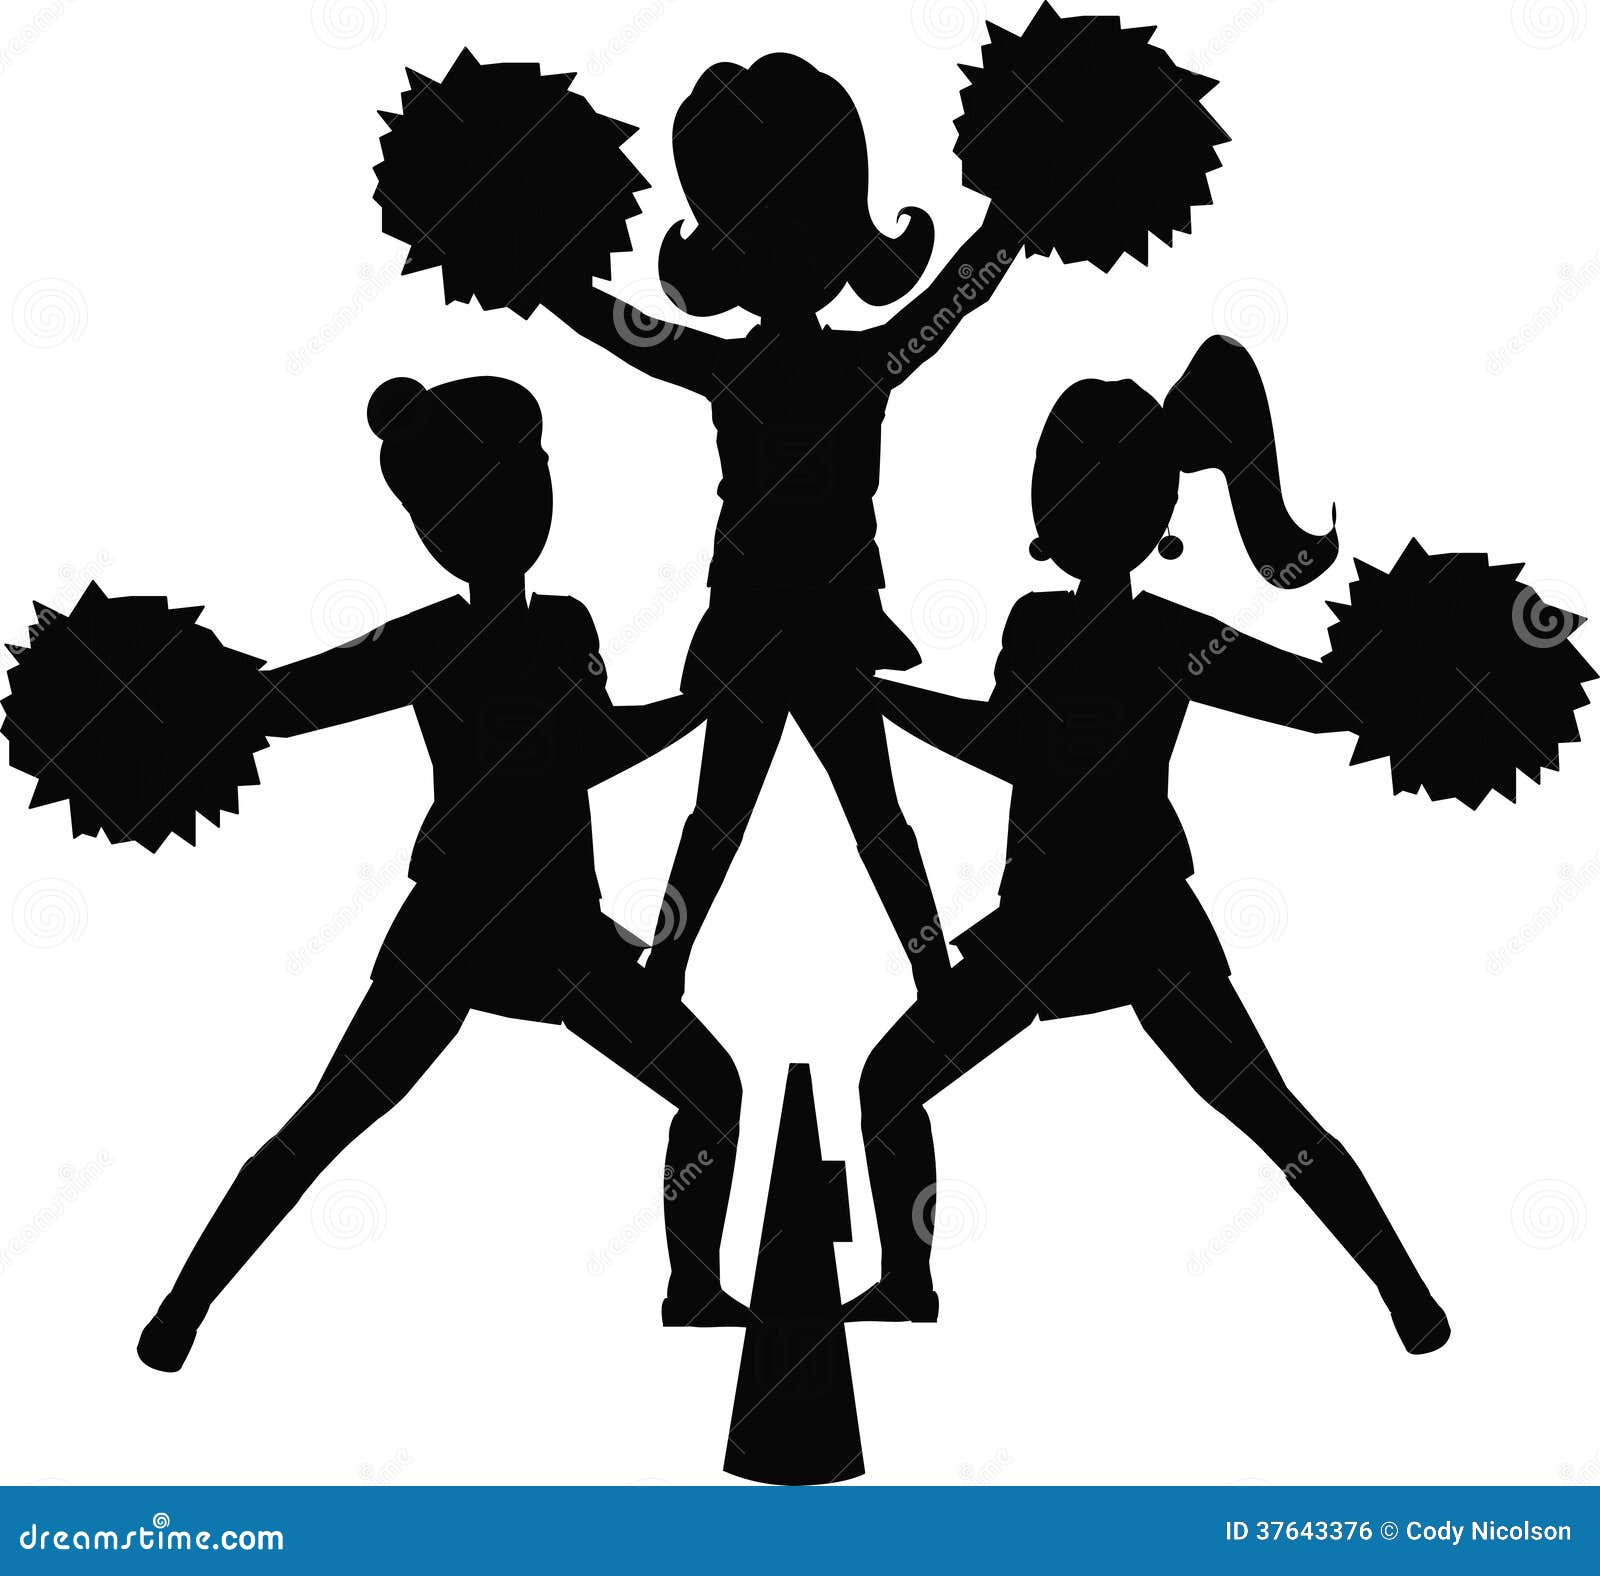 Cheerleader Silhouettes Royalty Free Stock Image - Image: 37643376